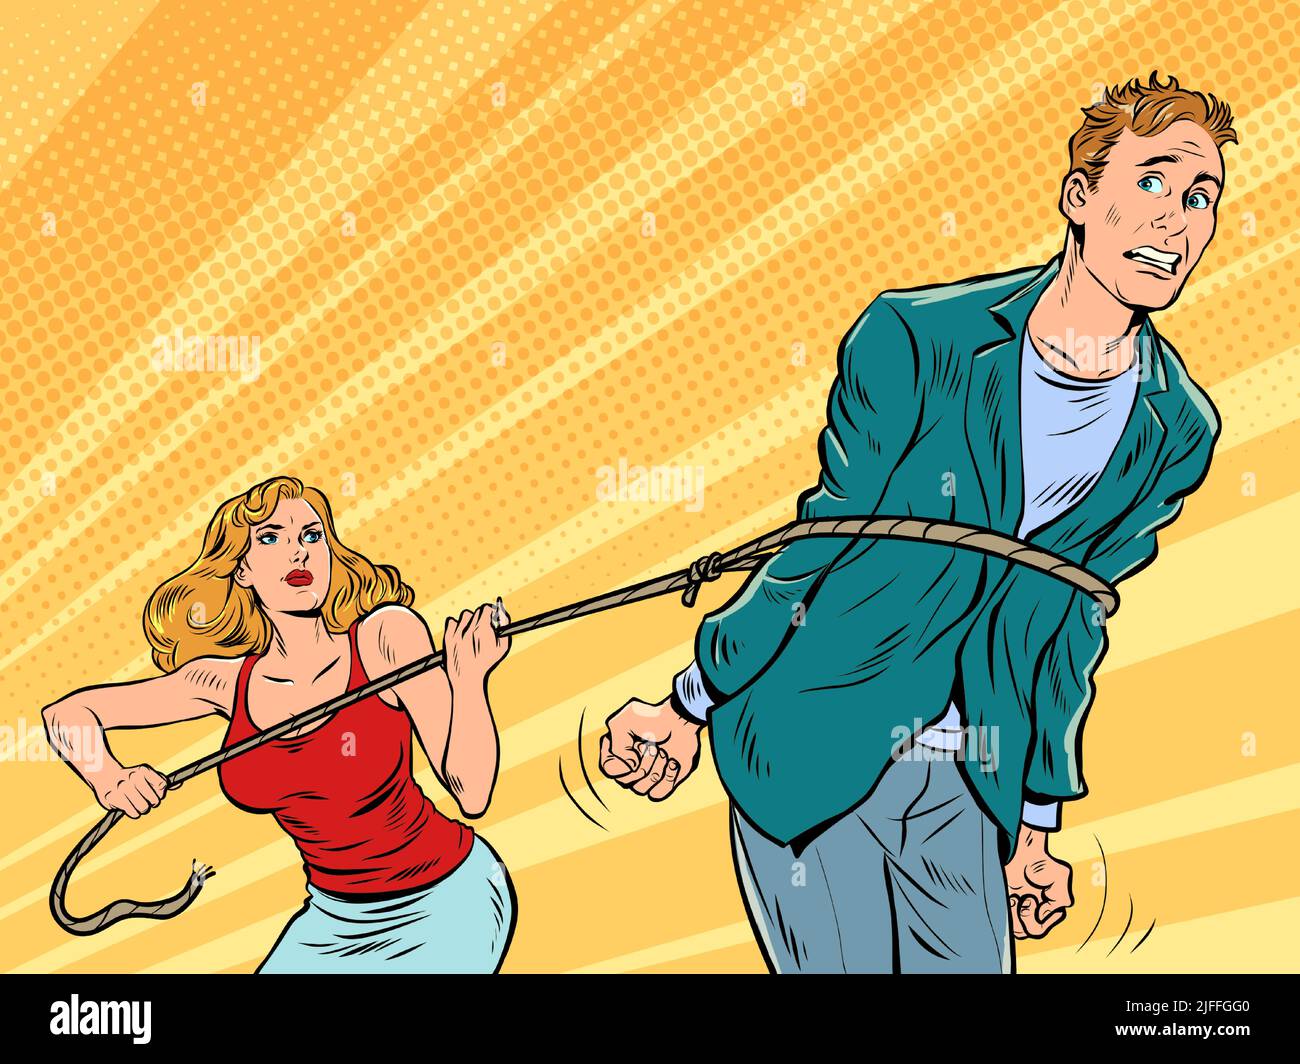 the woman lassoed the man, the girl threw a noose on the man and took him prisoner. Pop Art Retro Vector Illustration Kitsch Vintage 50s 60s Style Stock Vector